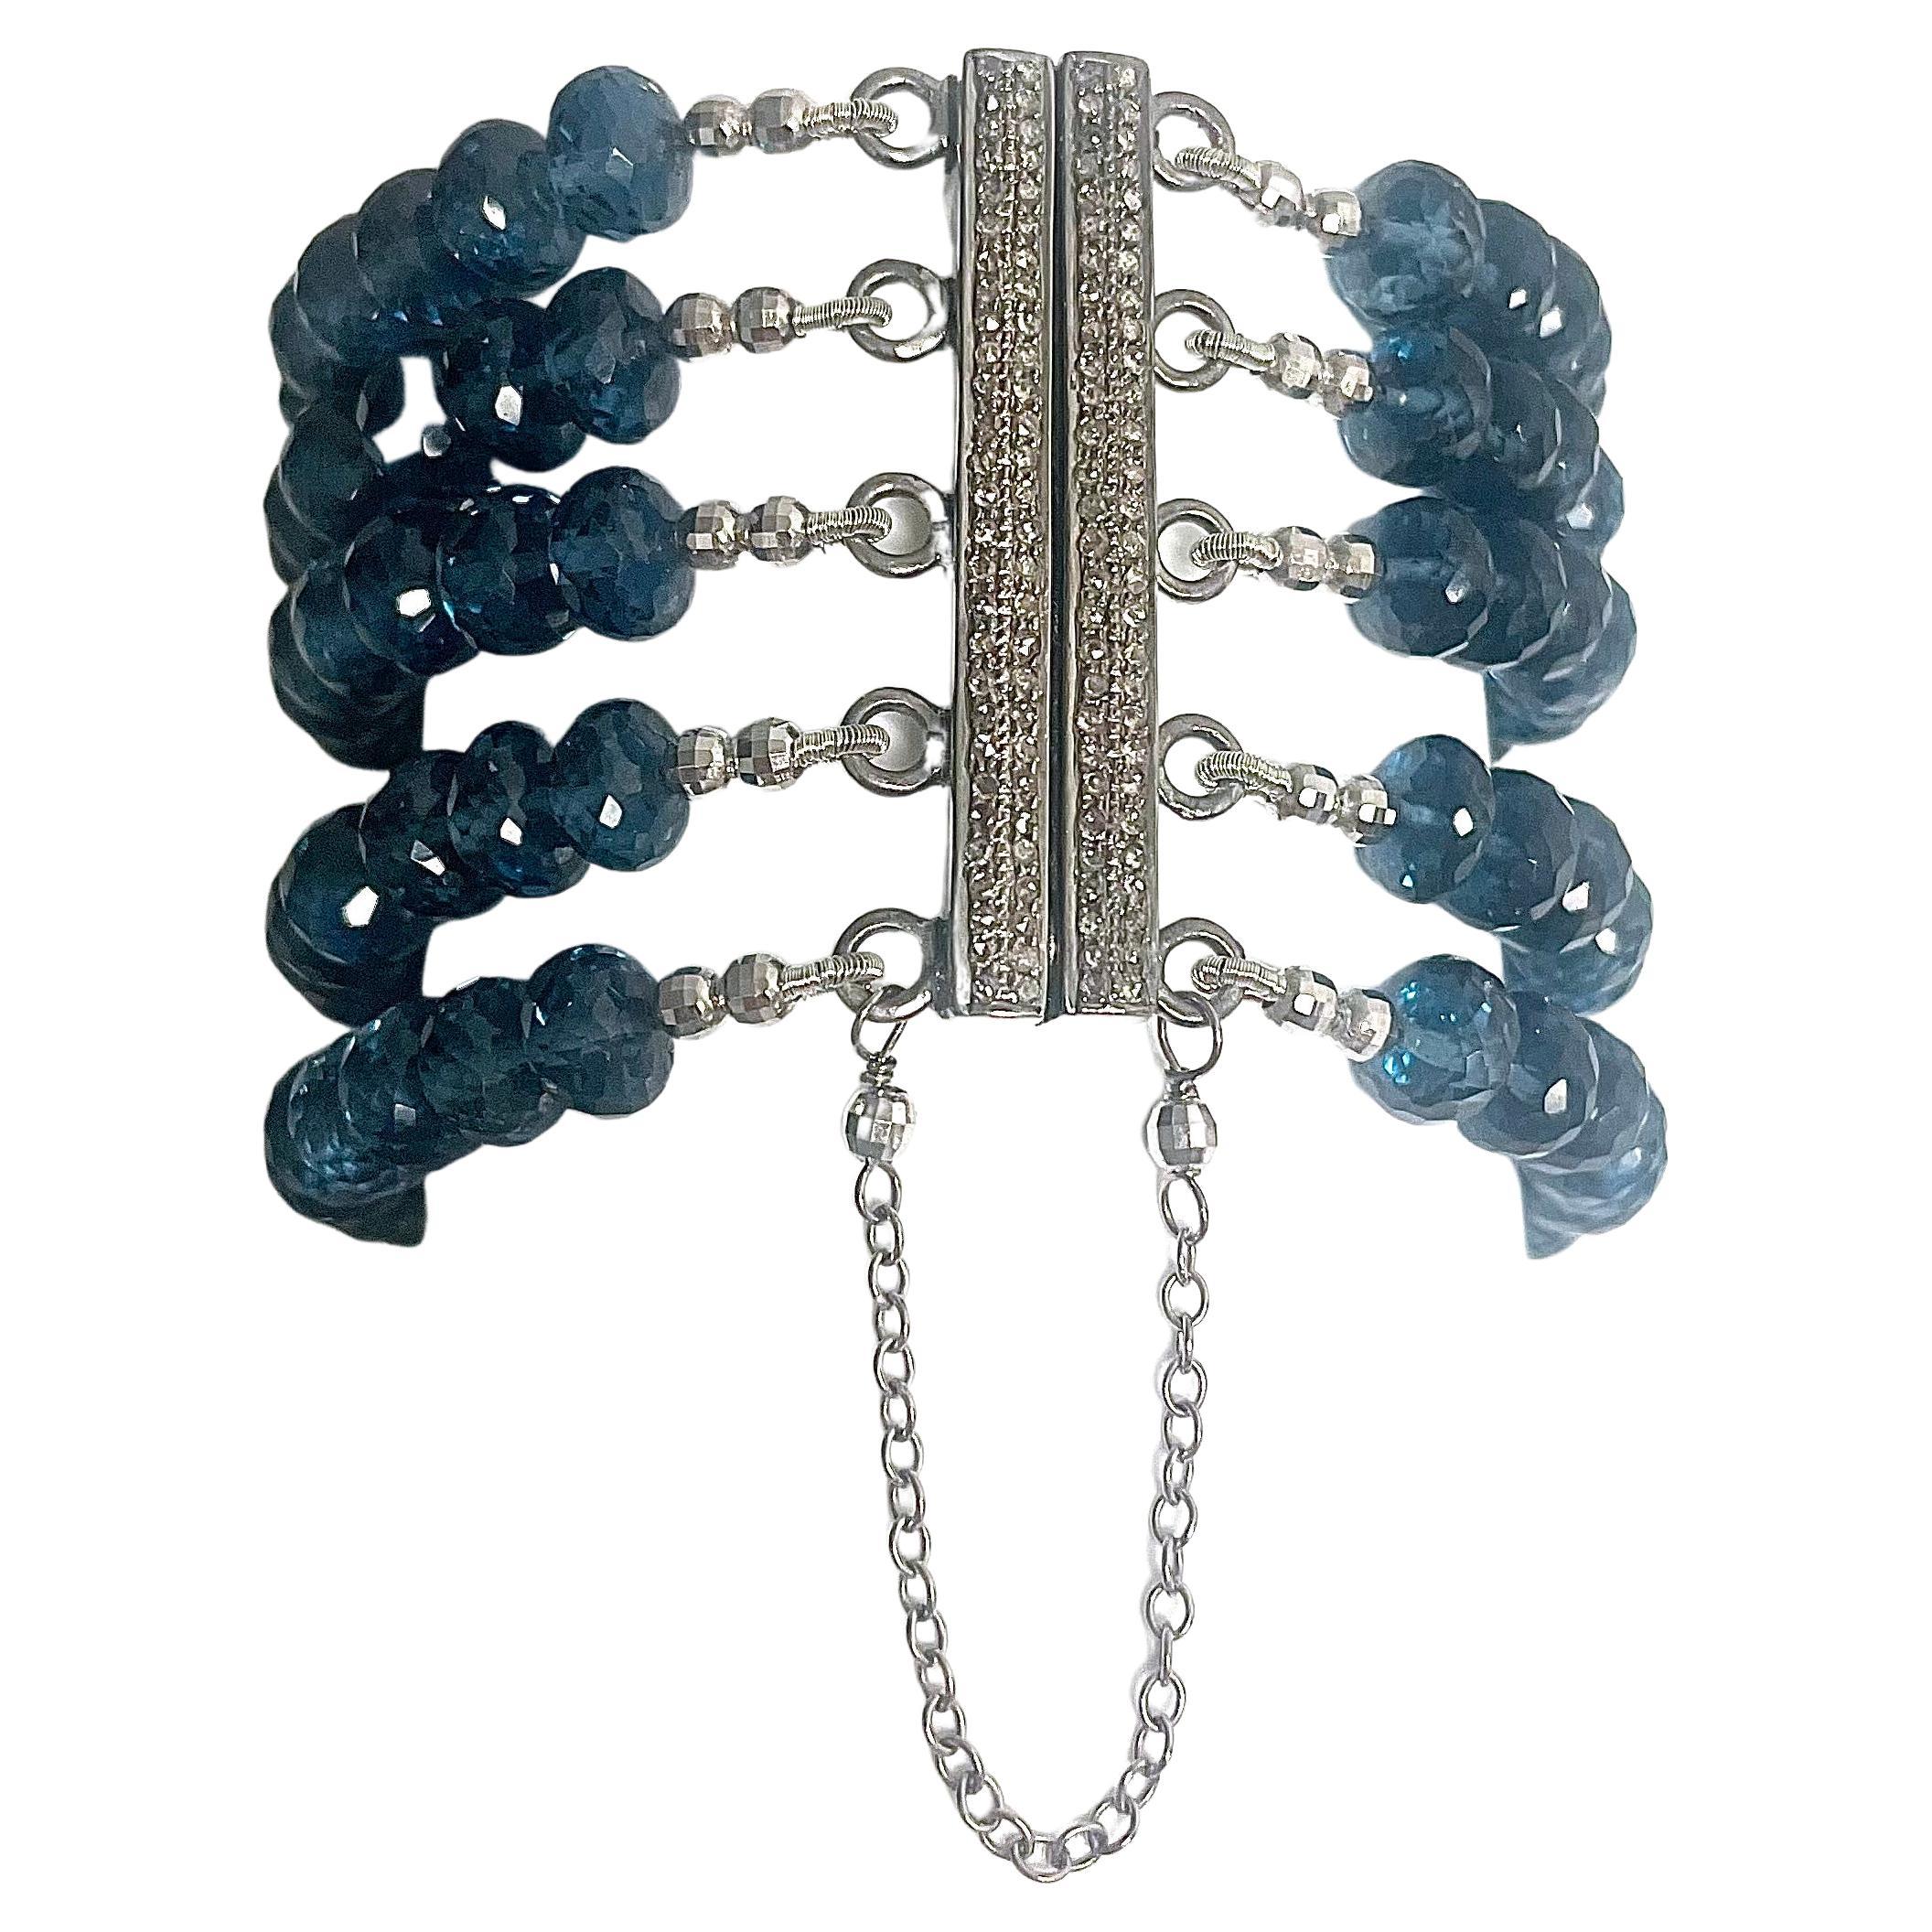 Description
The rich and exquisite London Blue color of this five strand quartz bracelet doesn’t go unnoticed and makes a bold statement with its unusual pave diamond centerpiece. The bracelet is secured with a unique pave diamond magnetic clasp for